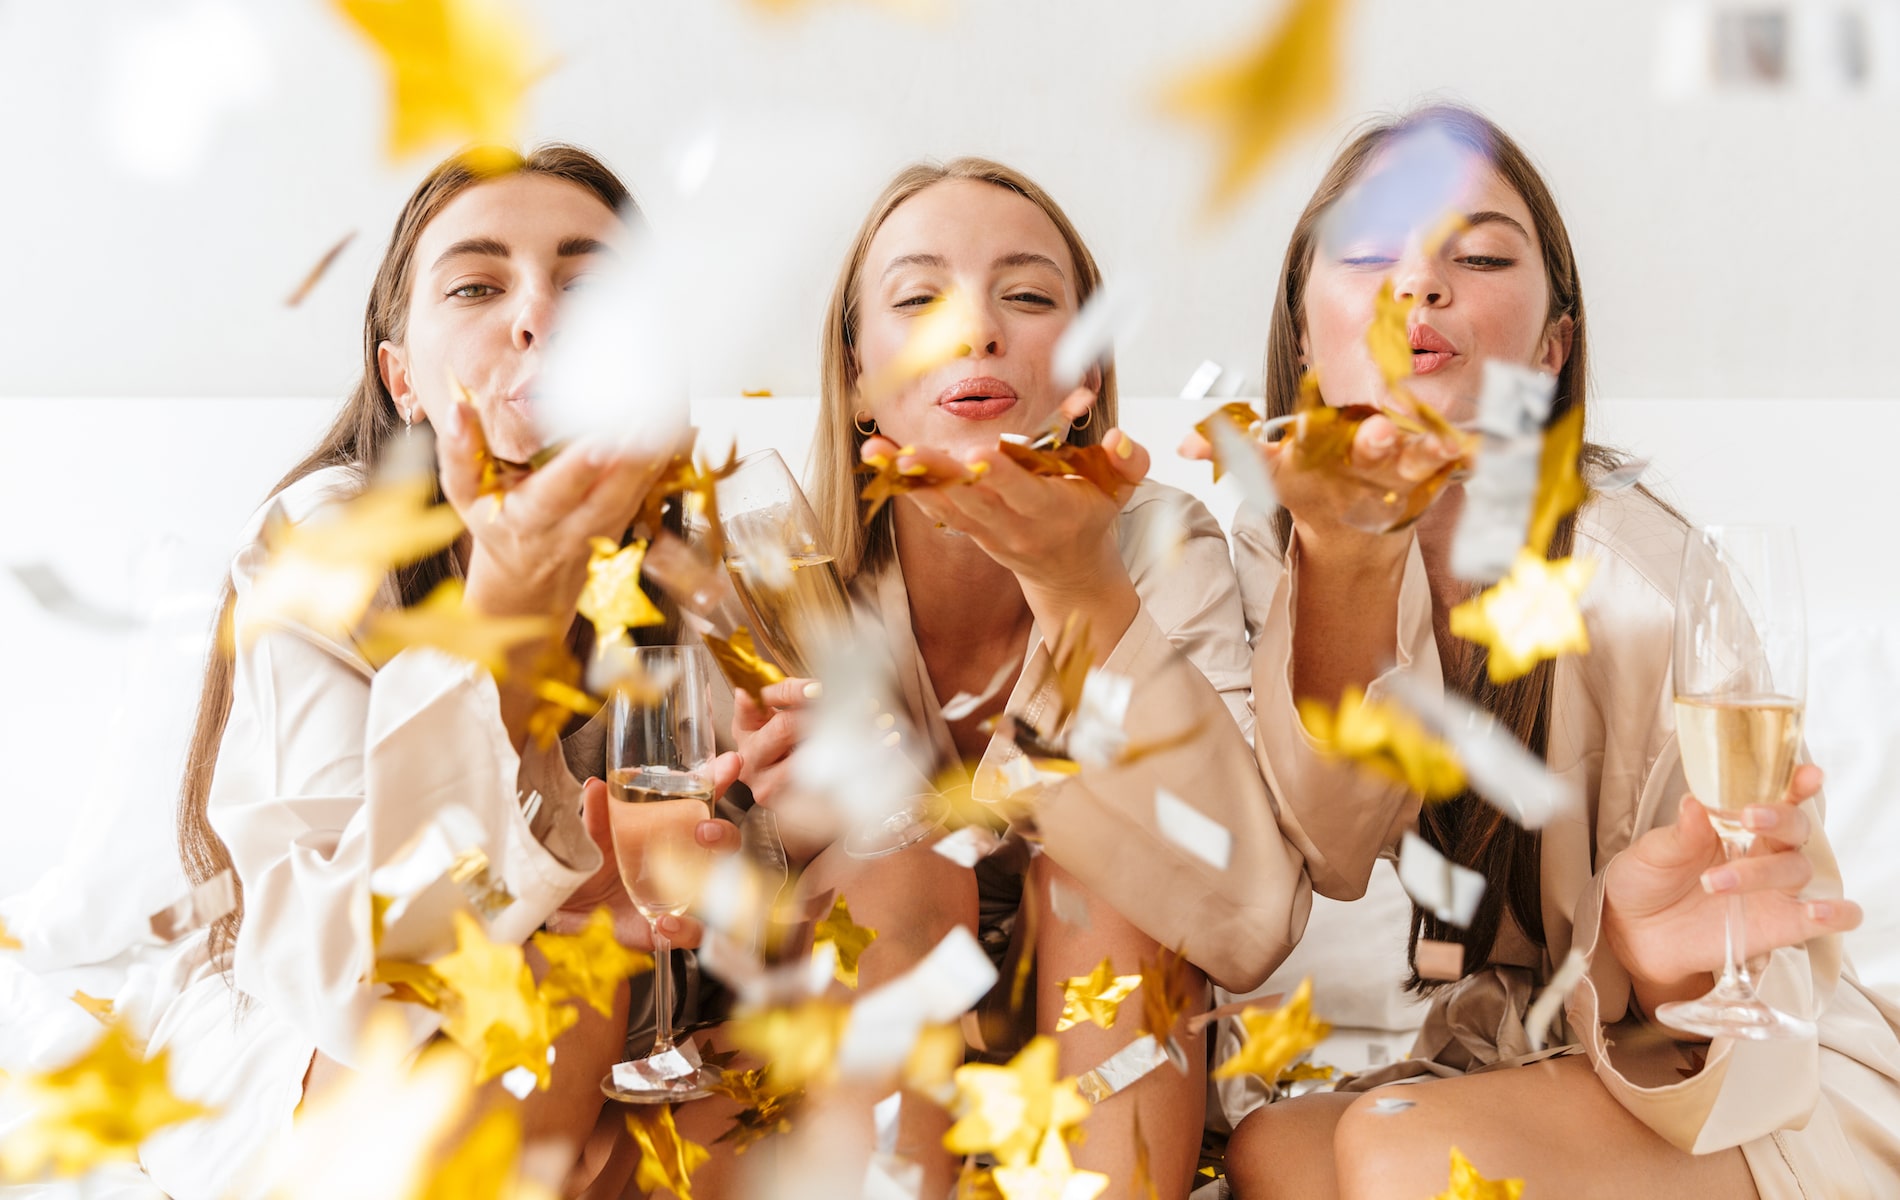 Bachelorette Parties for All Personalities